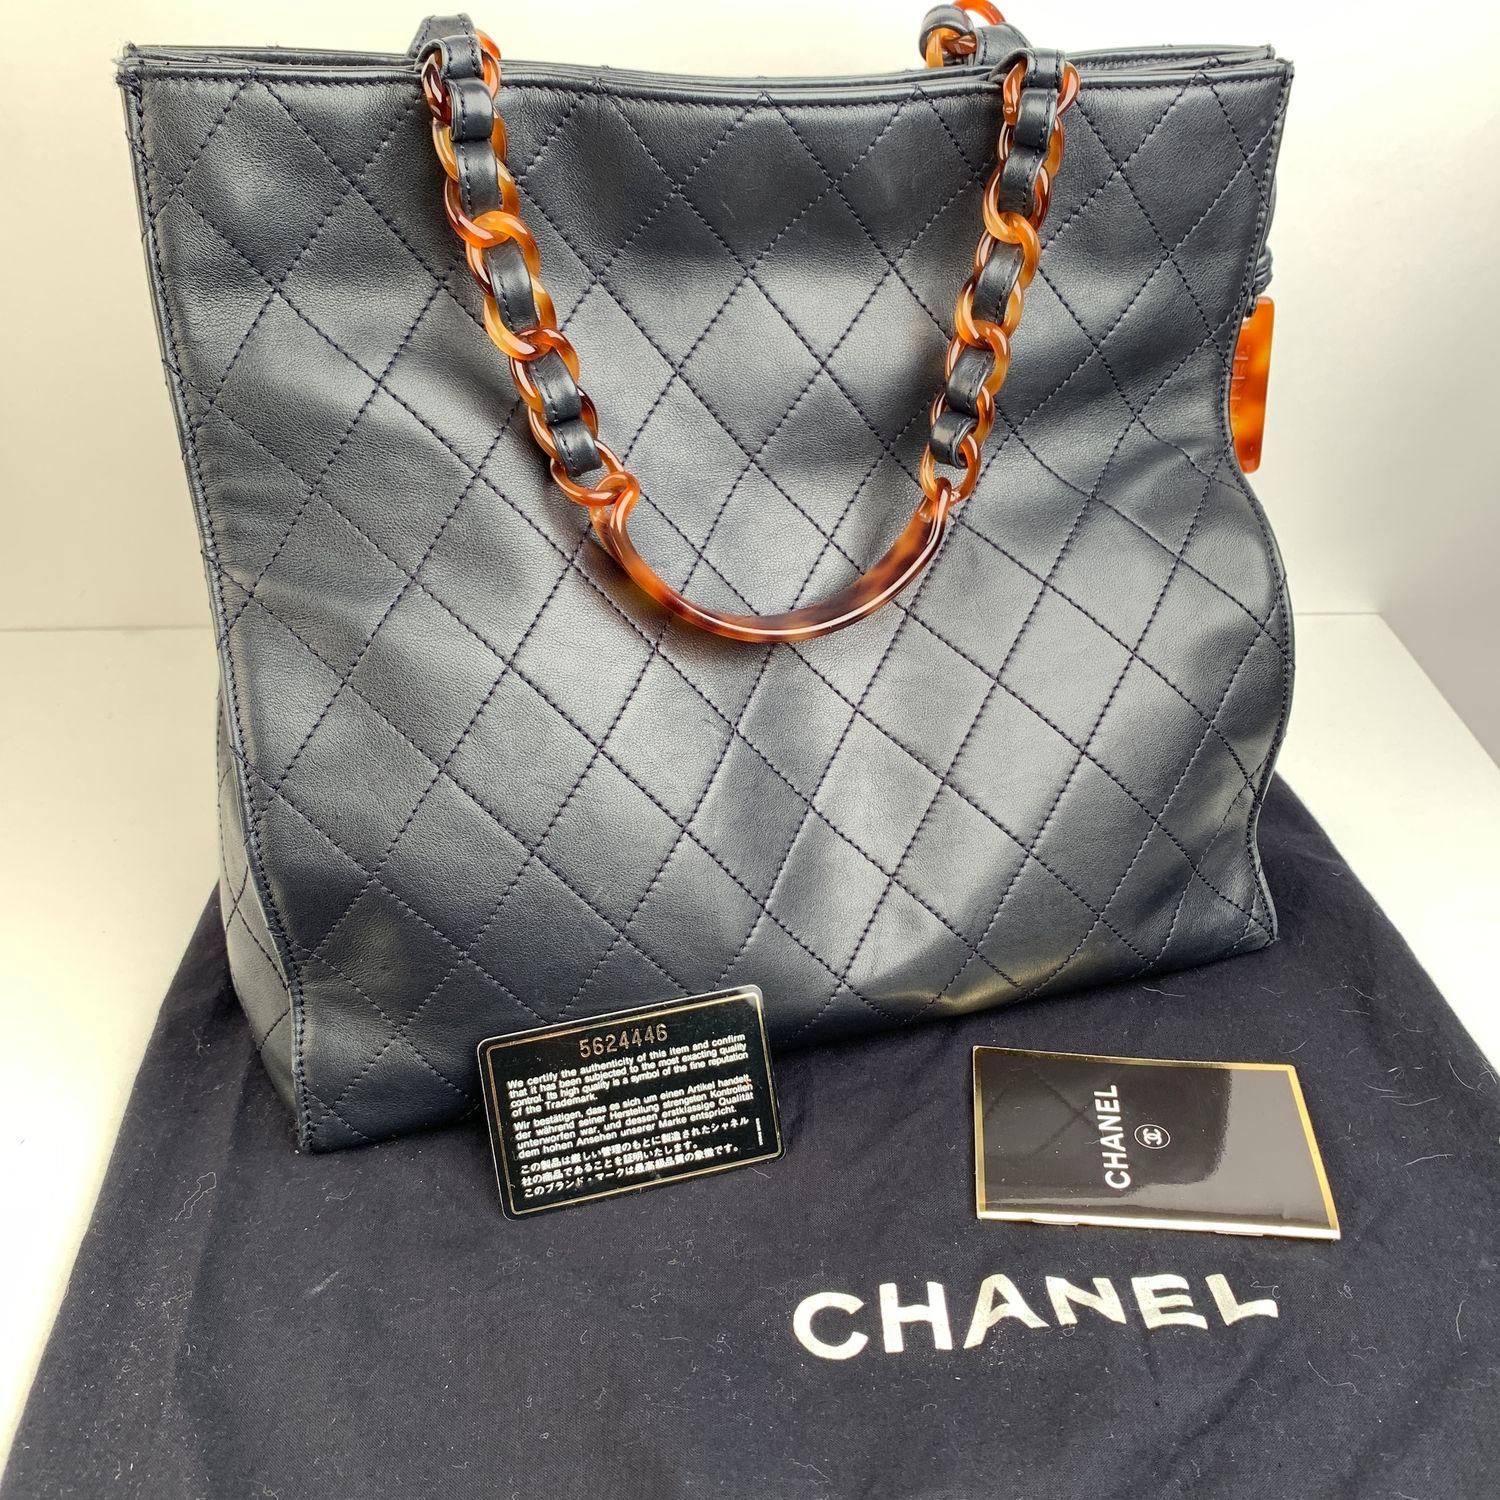 CHANEL Vintage Shopping Tote in Navy Blue quilted leather,  from the 90s. Tortoise chain link top handles threaded with leather. Tortoise lucite Chanel pendant detailing on the side. Double magnetic button closure on top. Fabric interior. 2 side zip